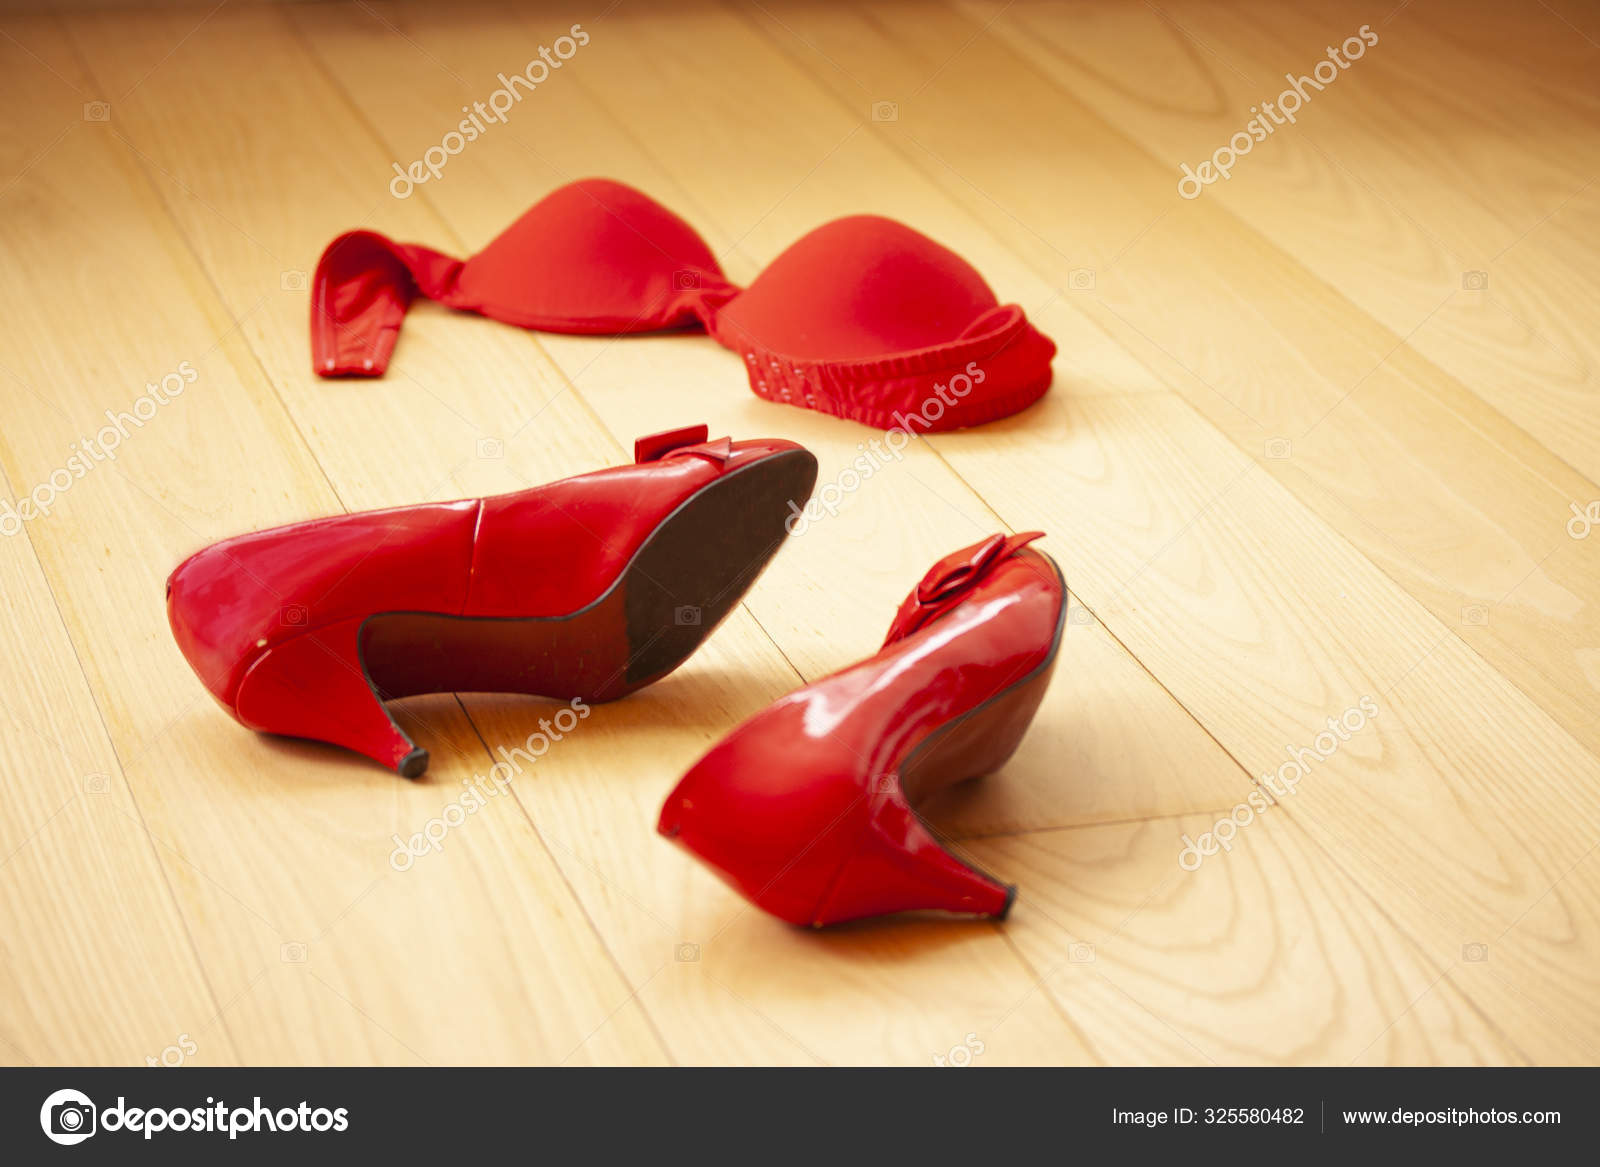 Red Lacquer High Heel Shoes Red Bra Lying Left Wooden Stock Photo by  ©oleschwander 325580482